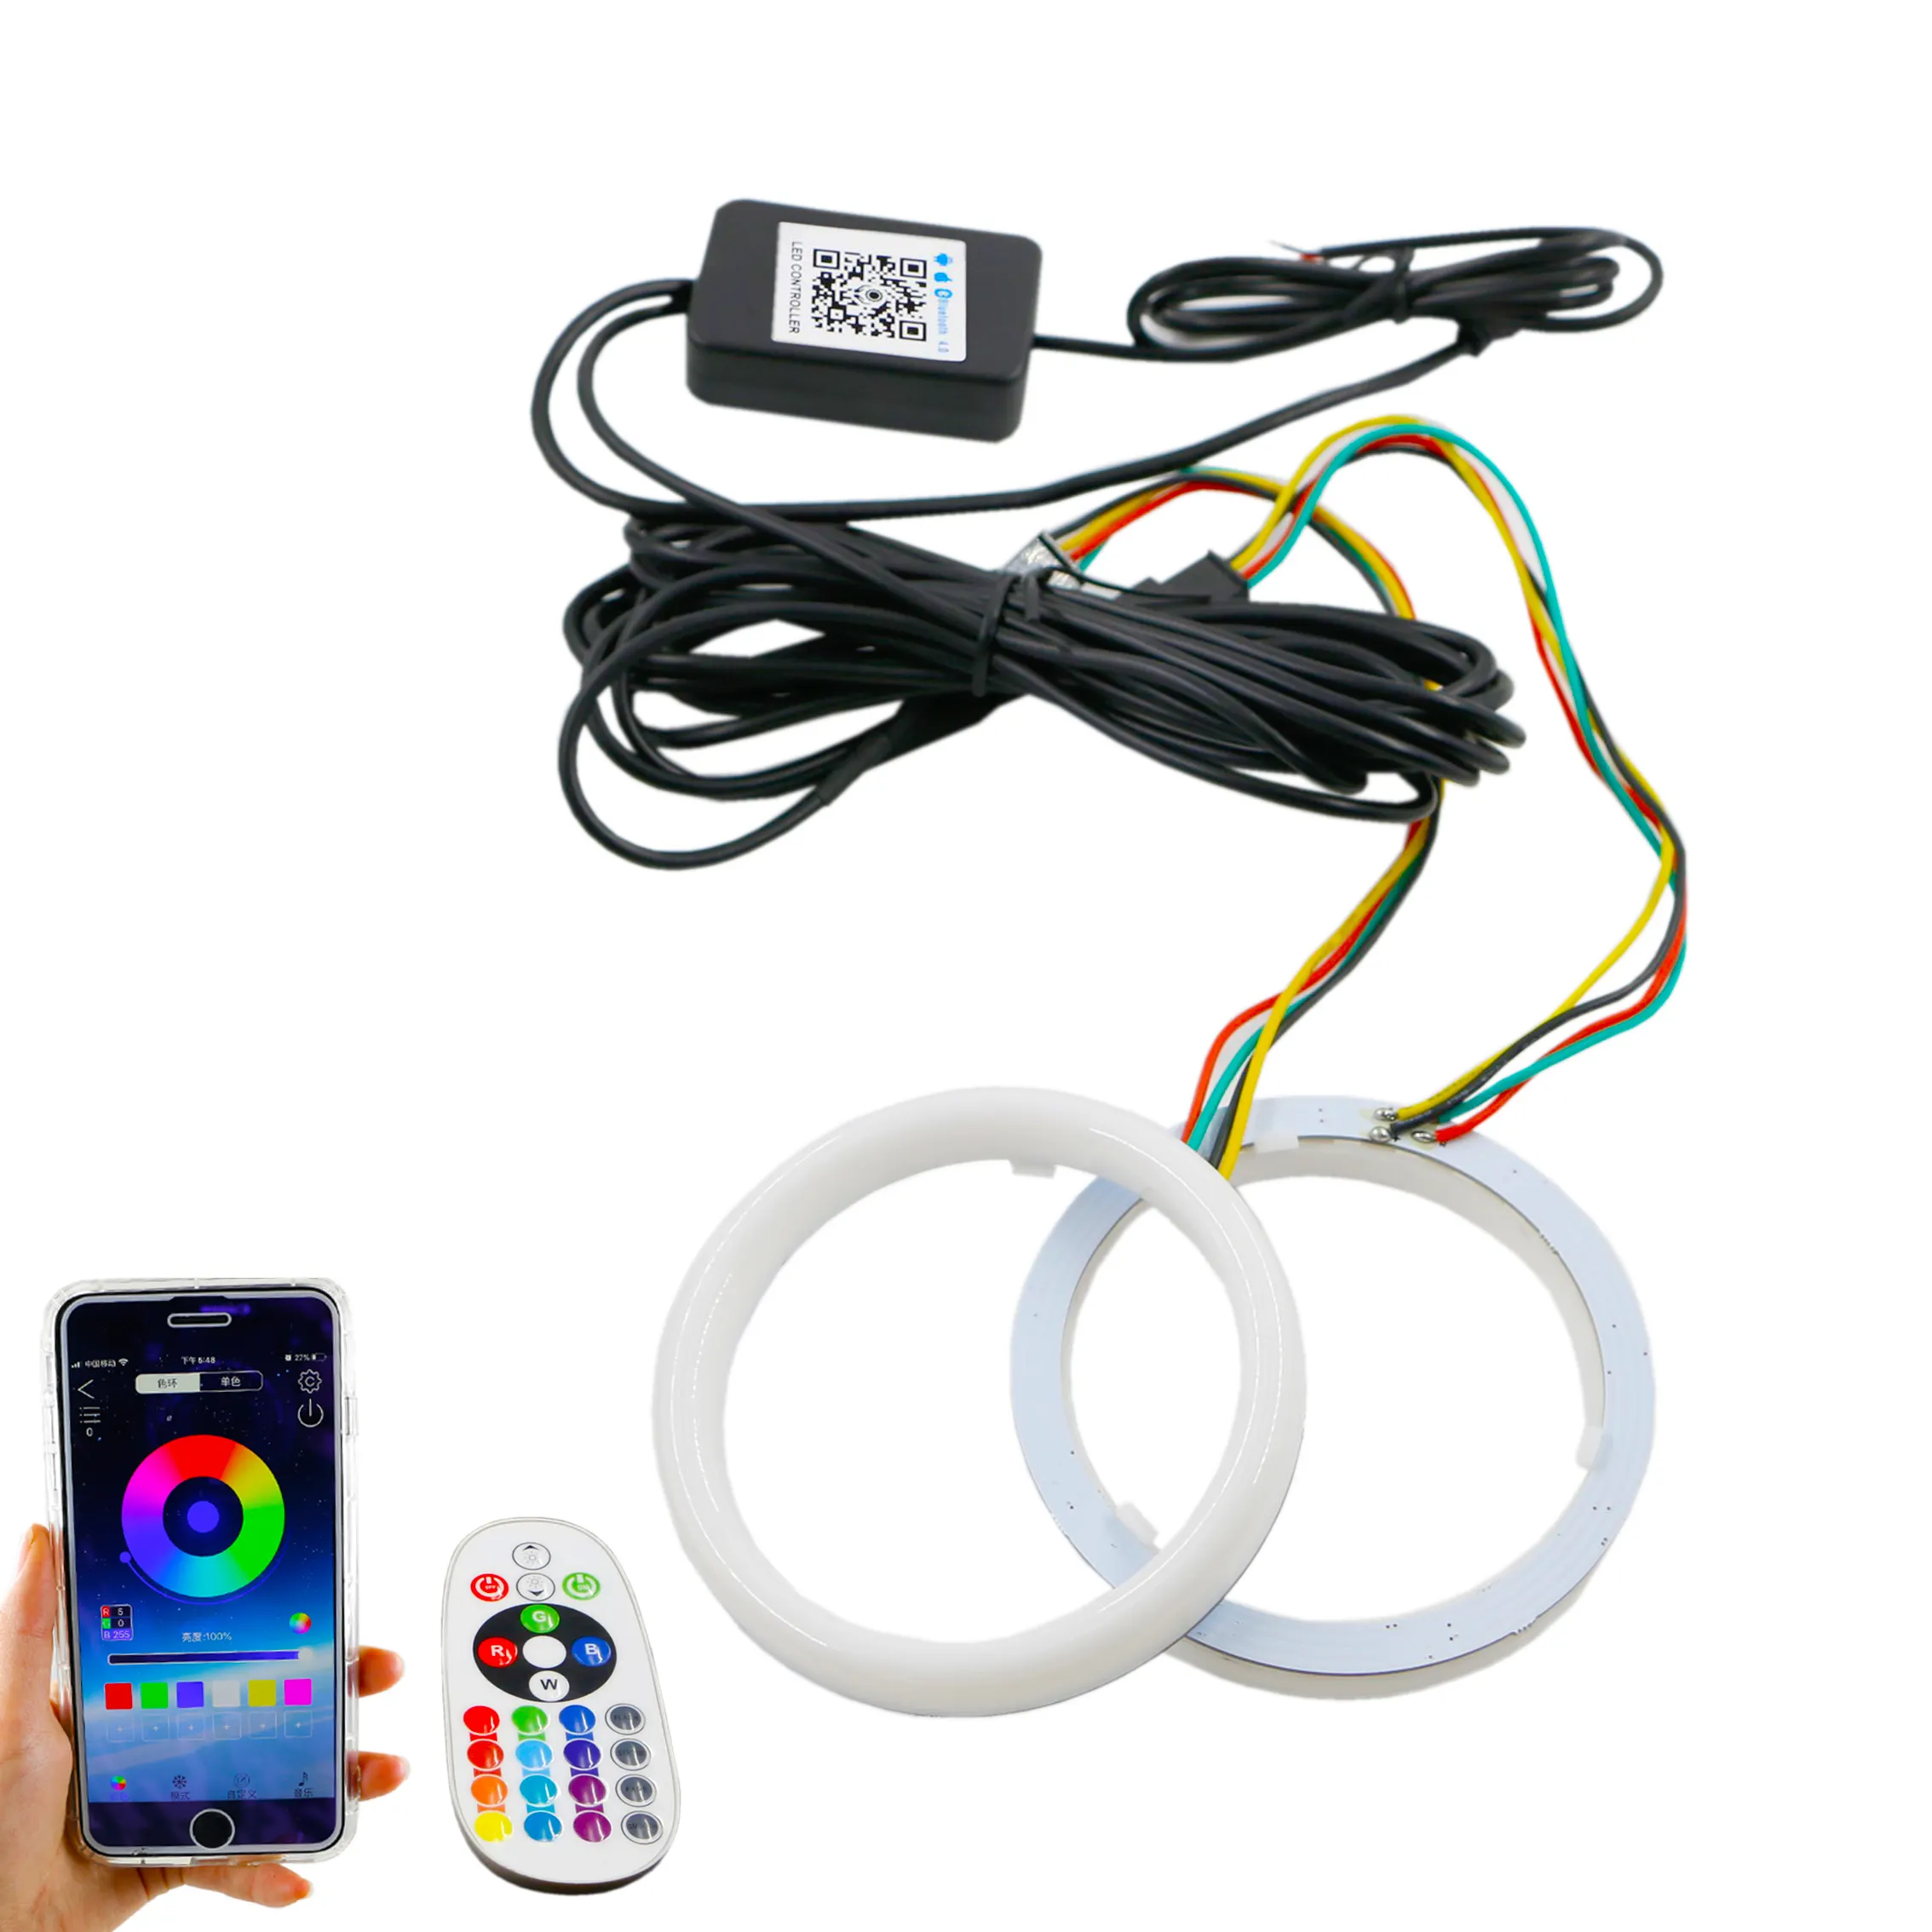 RGB Car Angel Eyes Halo Rings Smart Phone iOS Android App Control Multi-Color Led Light Circle Ring Headlight Lamp